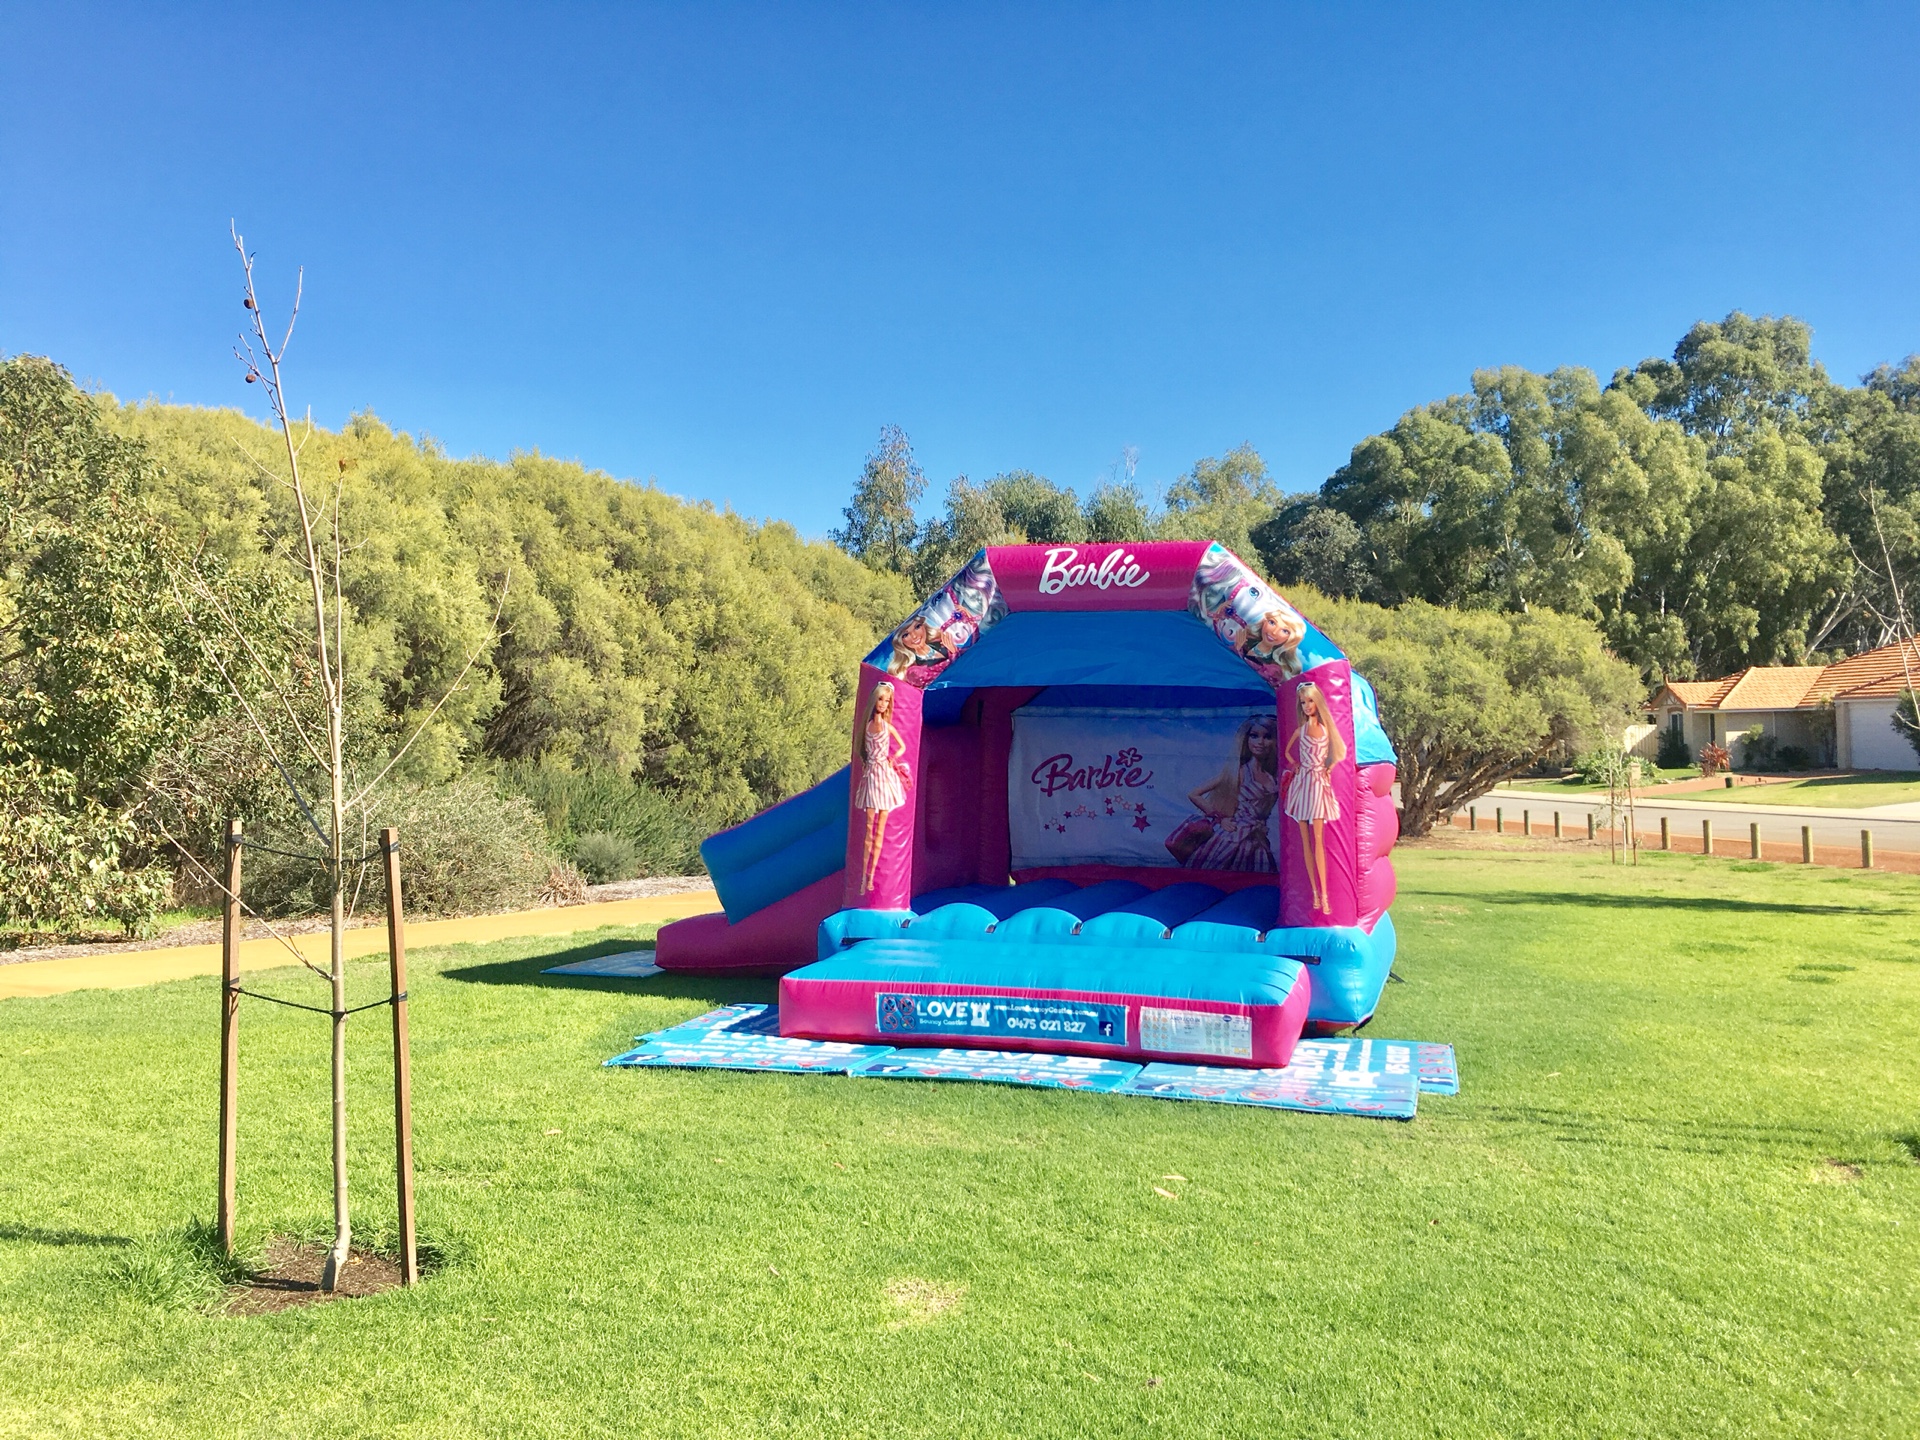 Copy of Barbie Combo Bouncy Castle Set Up In A Park In Perth, WA